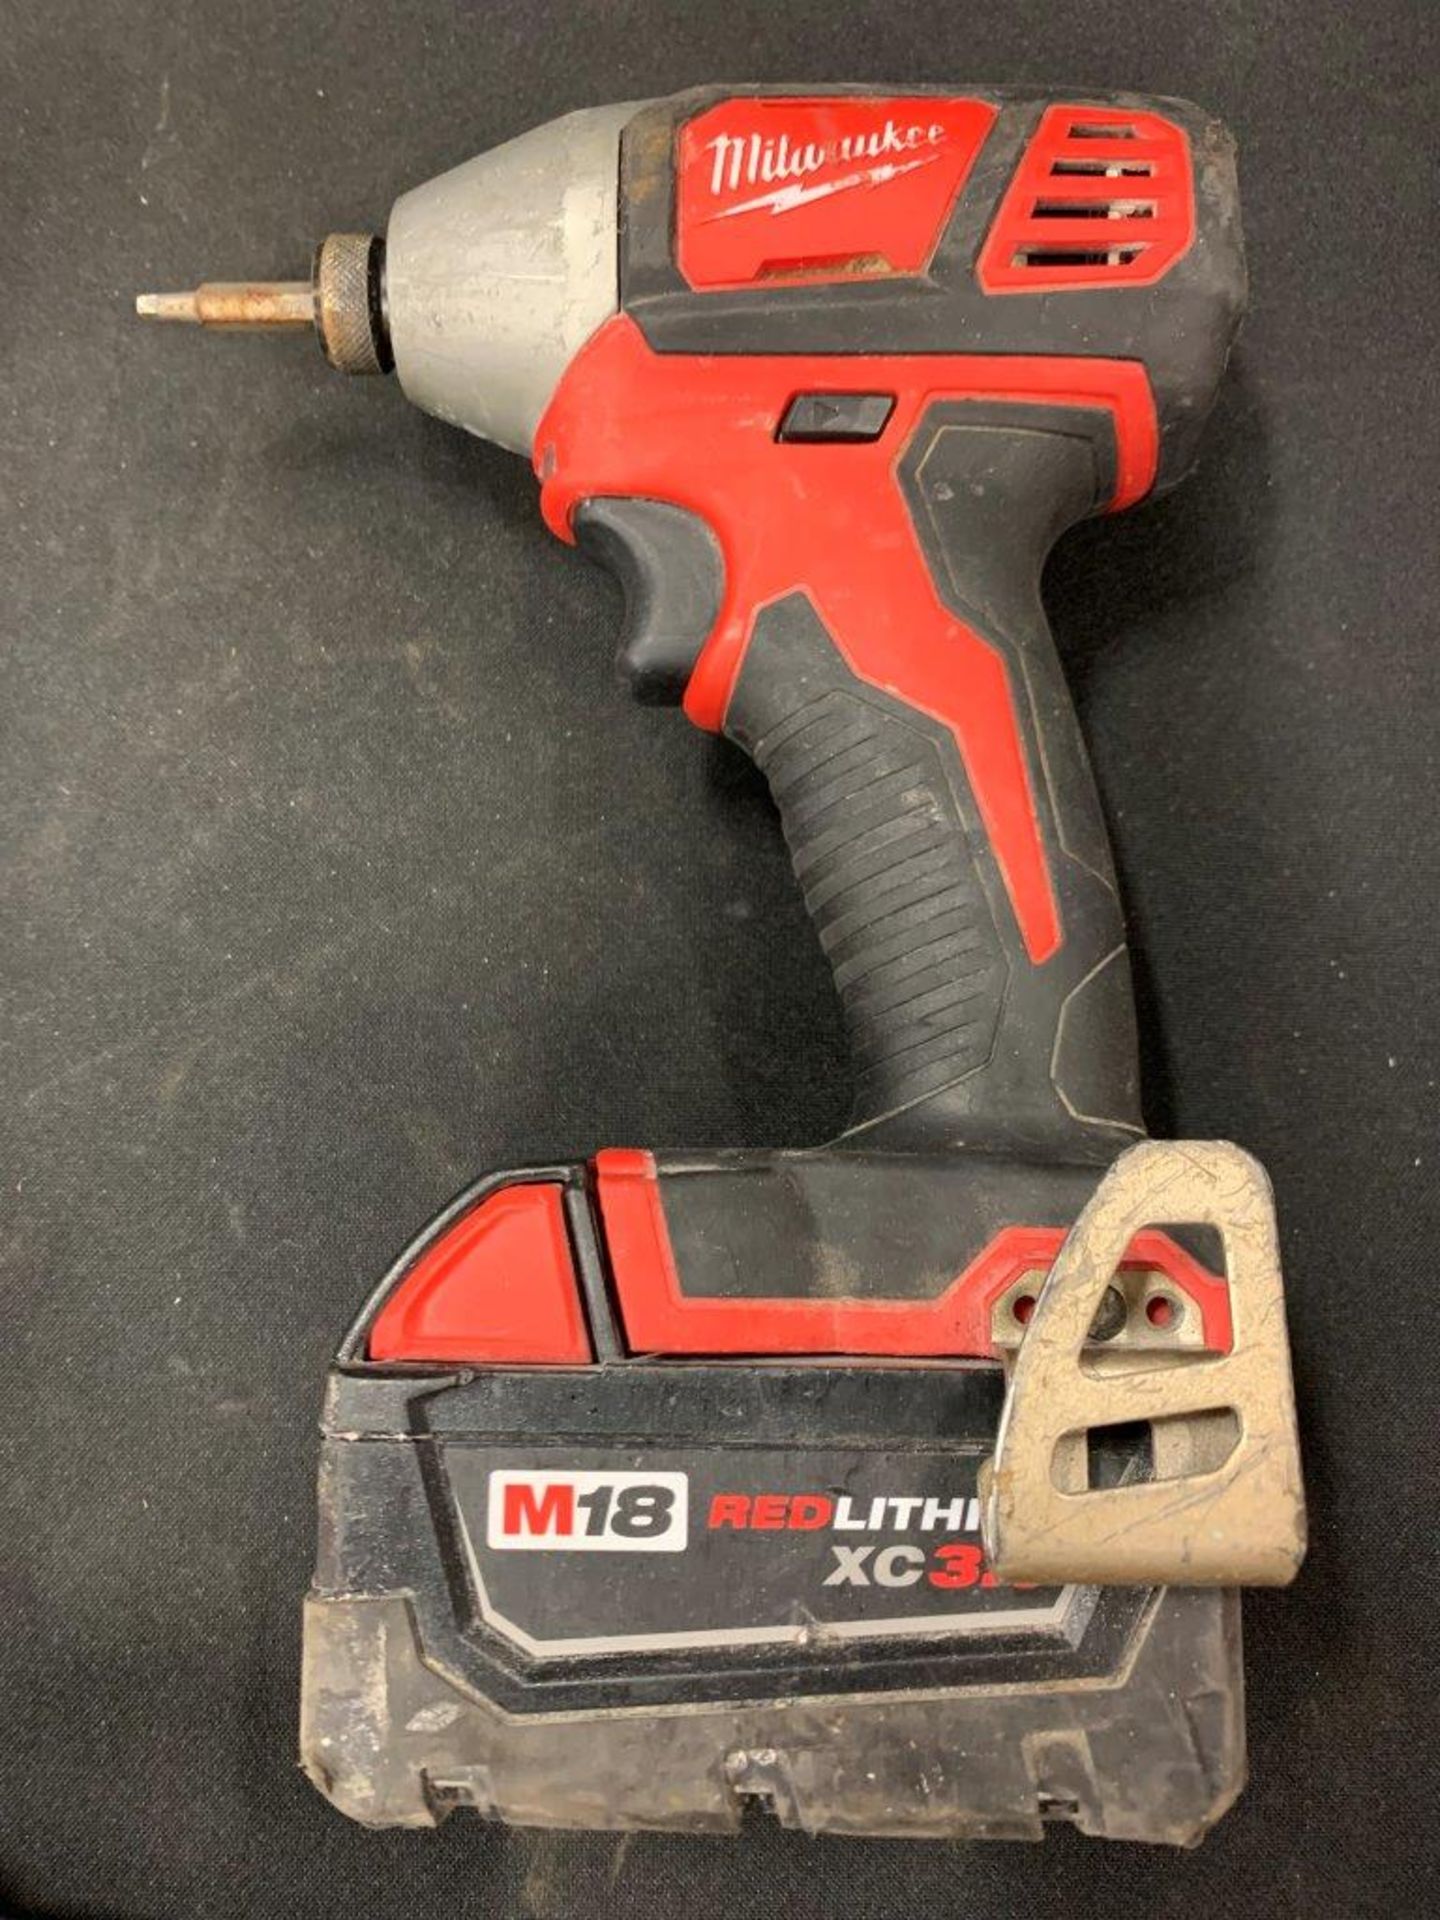 MILWAUKEE CORDLESS ANGLE GRINDER, DRILL, IMPACT DRIVER, FLASHLIGHT, ASSORTED BATTERIES - A58 - Image 7 of 14